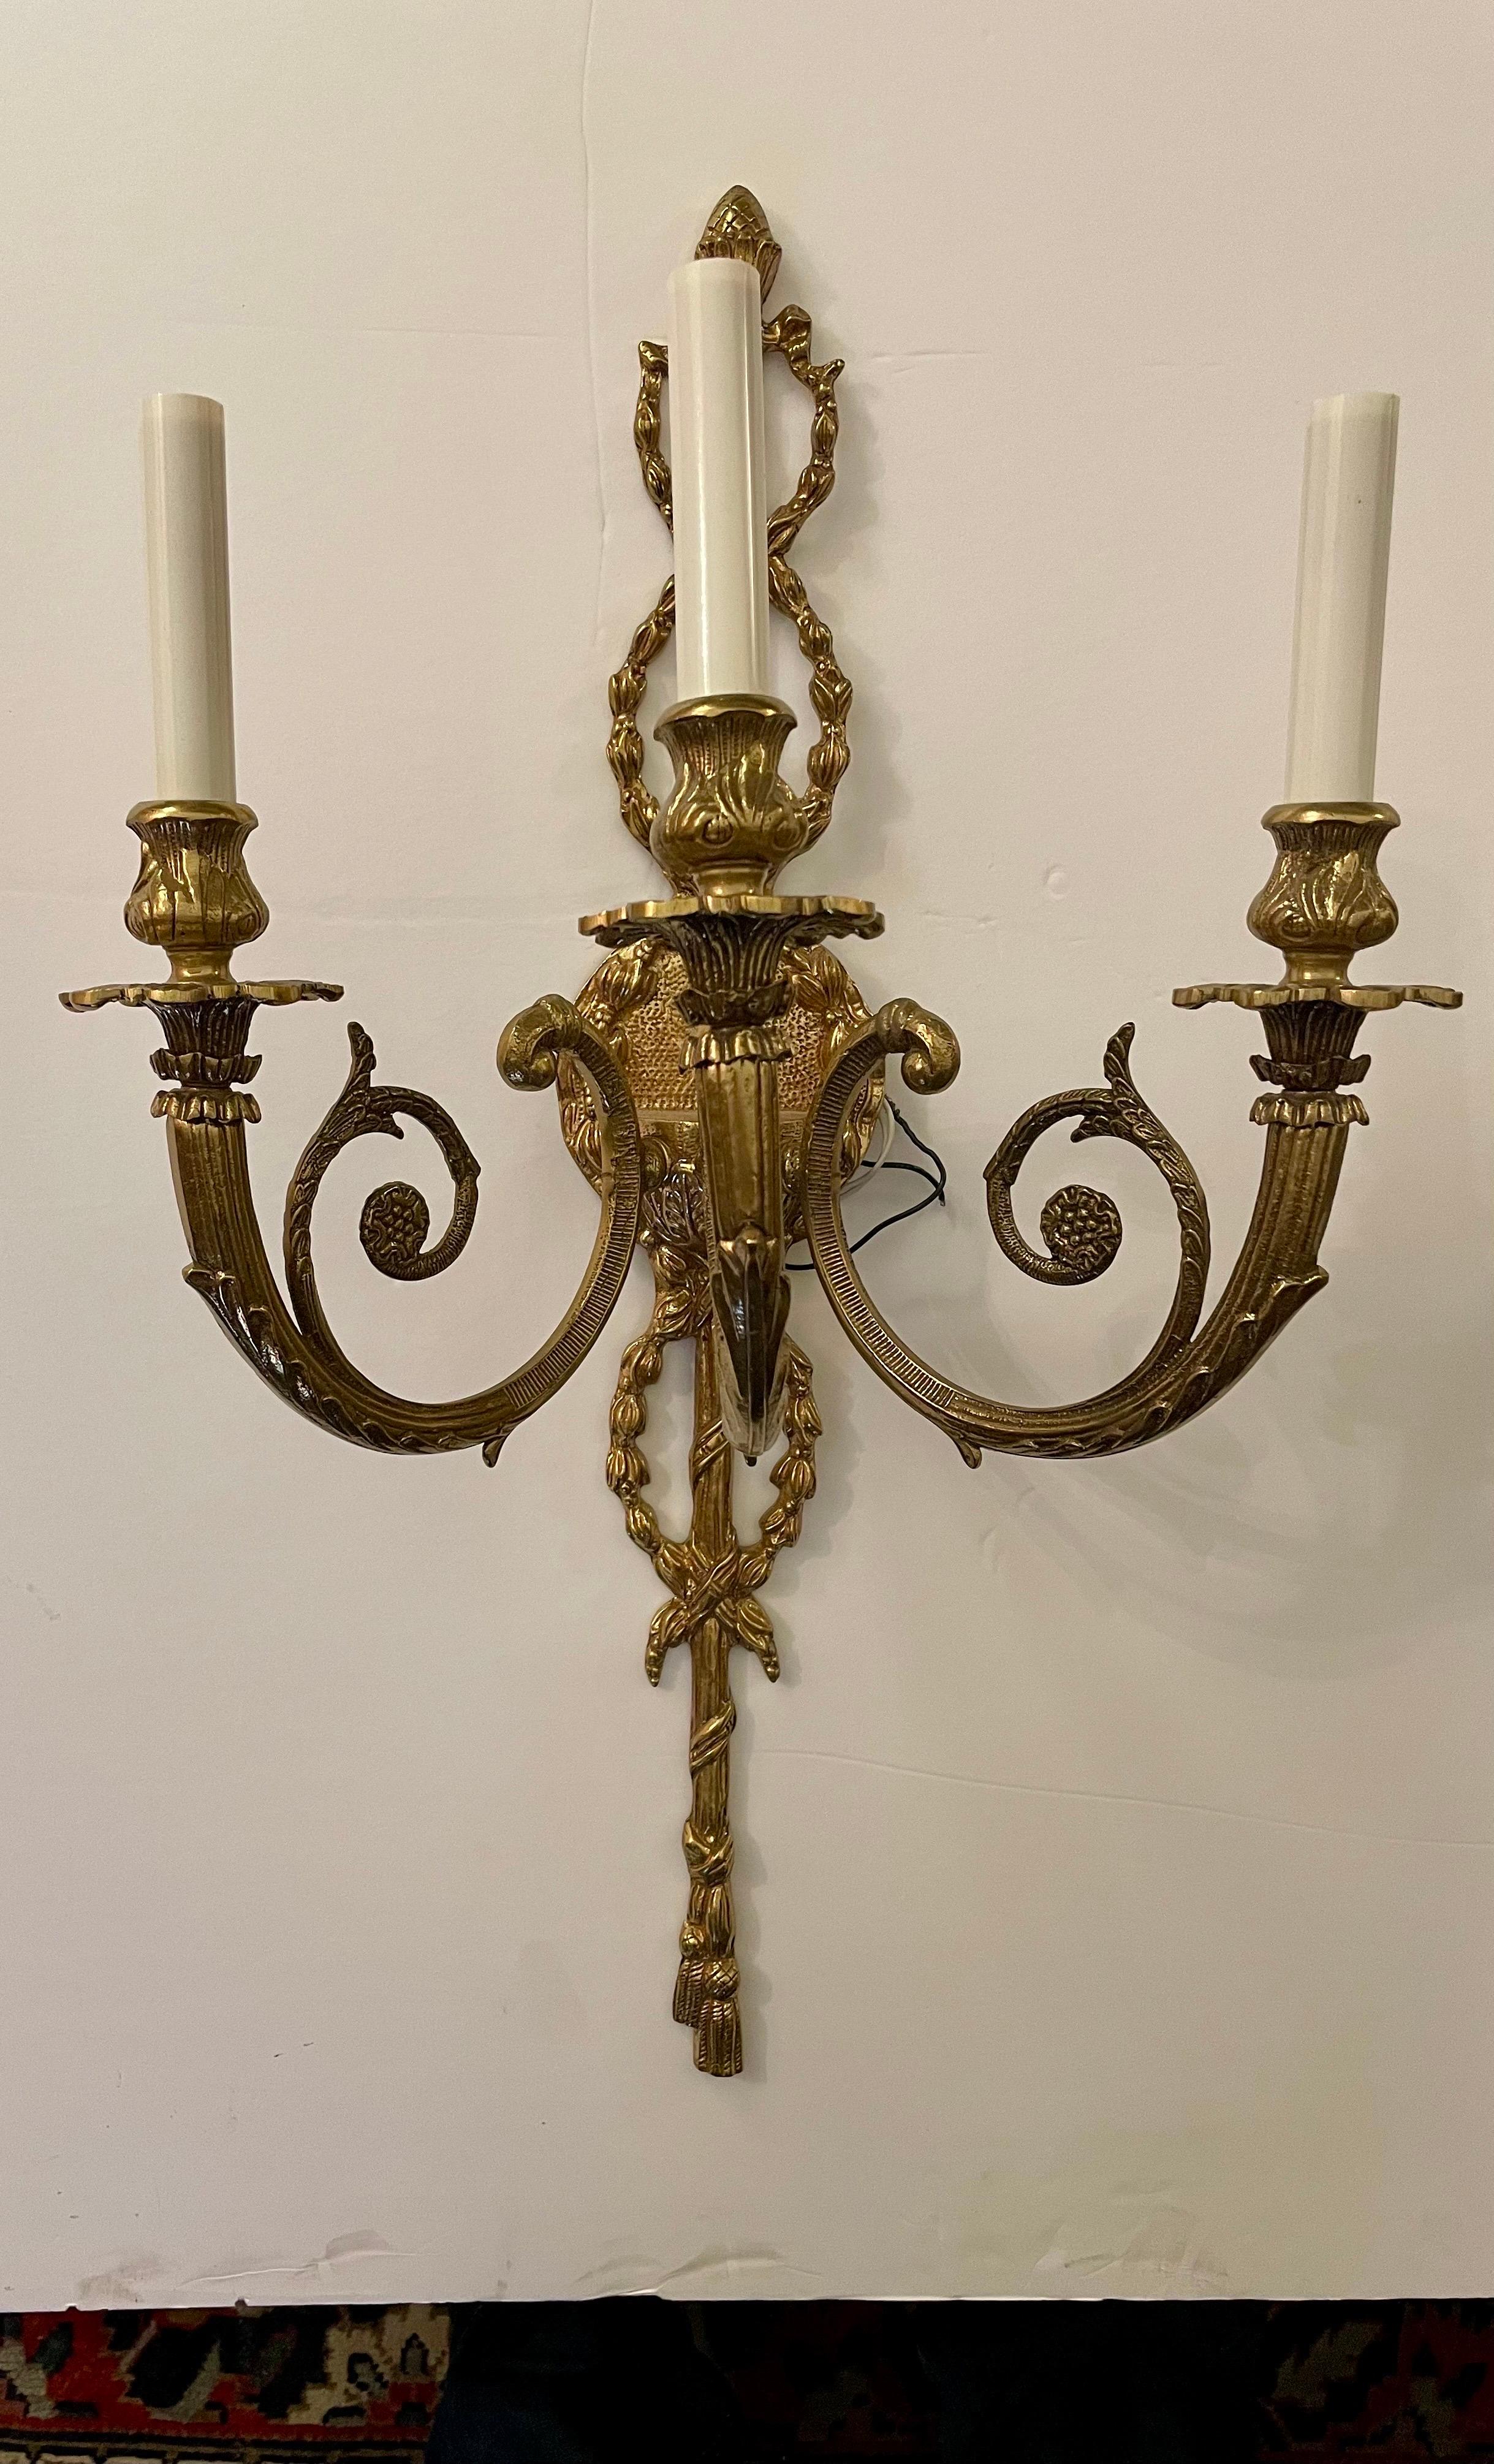 Pair of large scale Regency Style three arm brass Sconces. Wired and ready to use. New cream colored candle covers.